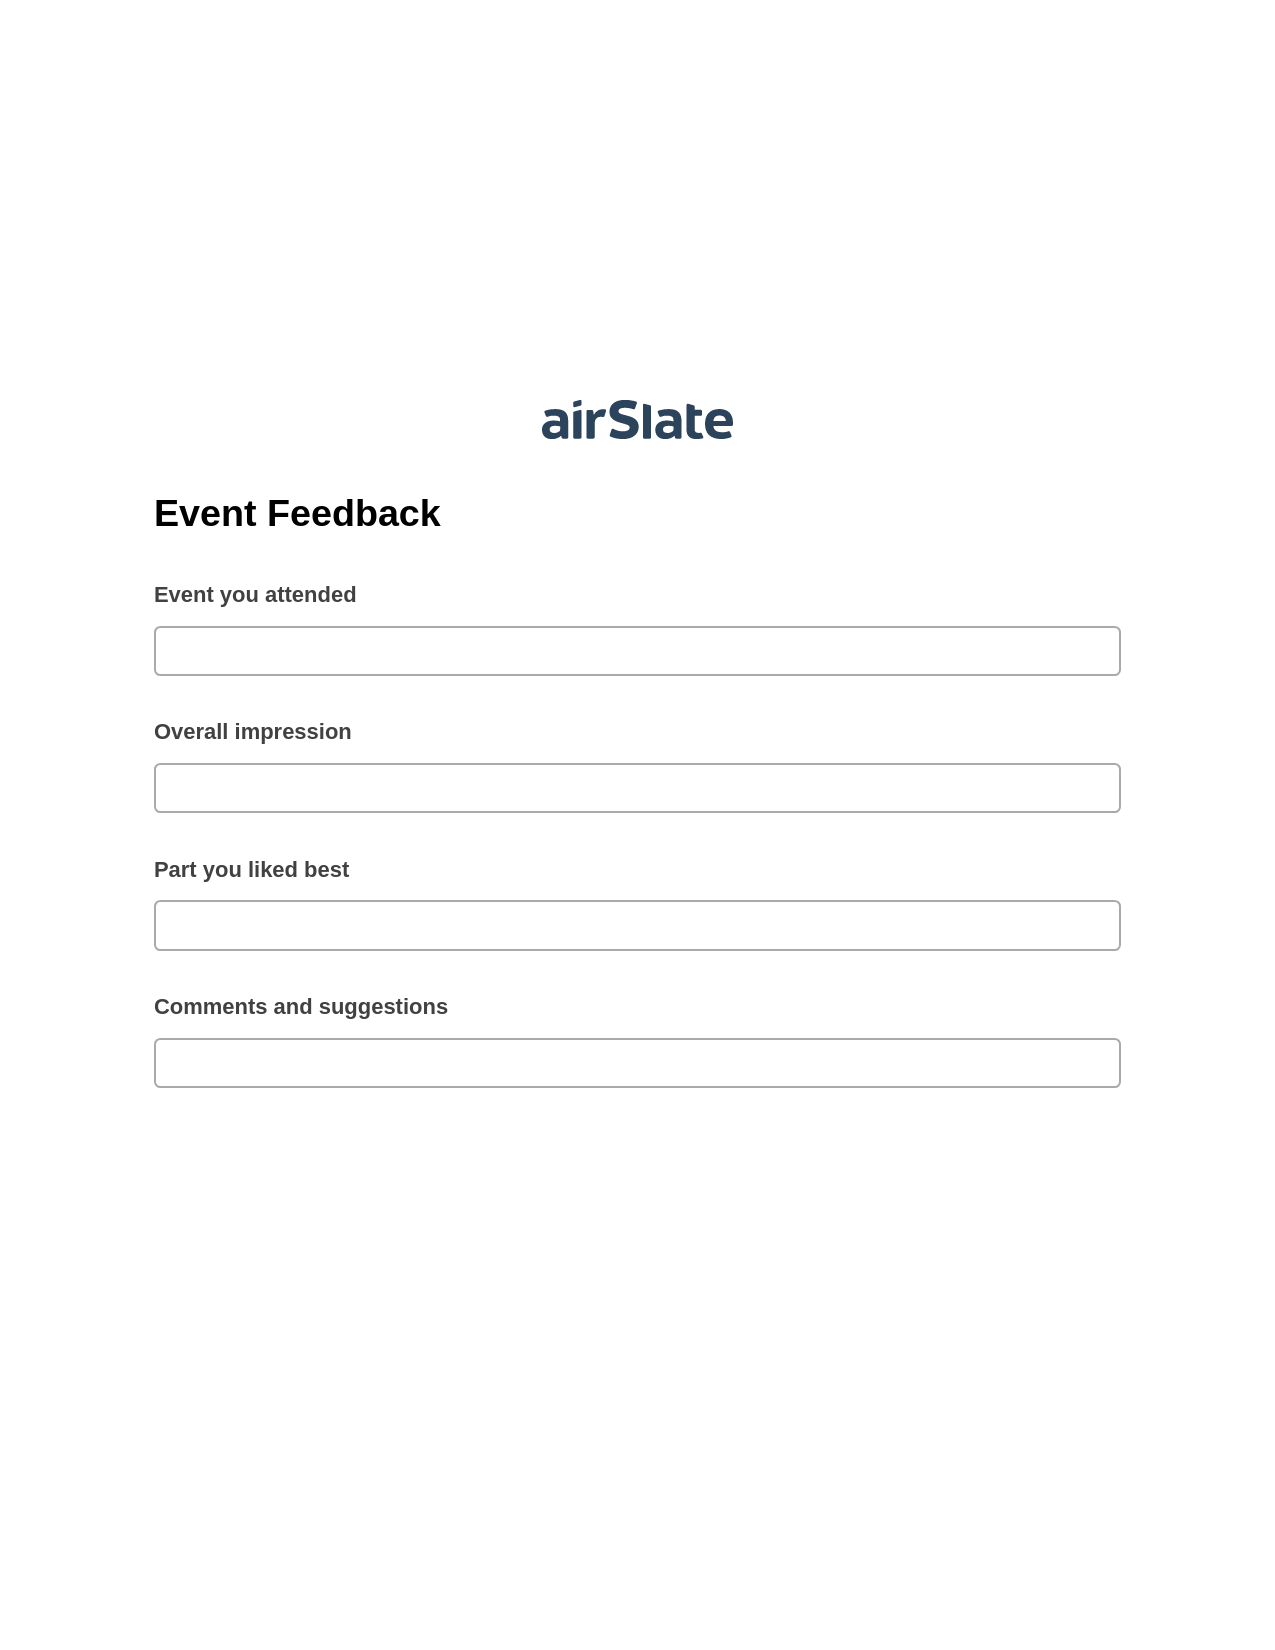 Event Feedback Pre-fill Dropdowns from MySQL Bot, Create slate addon, Export to NetSuite Record Bot